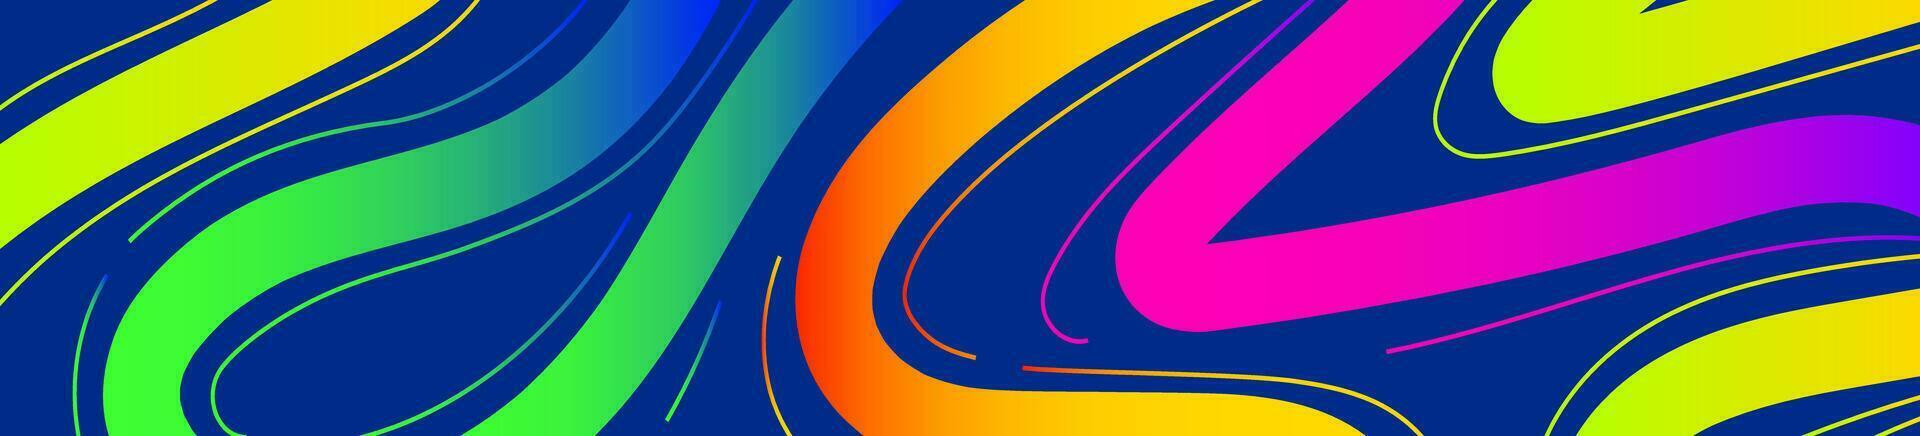 Banner abstract line neon color style vector